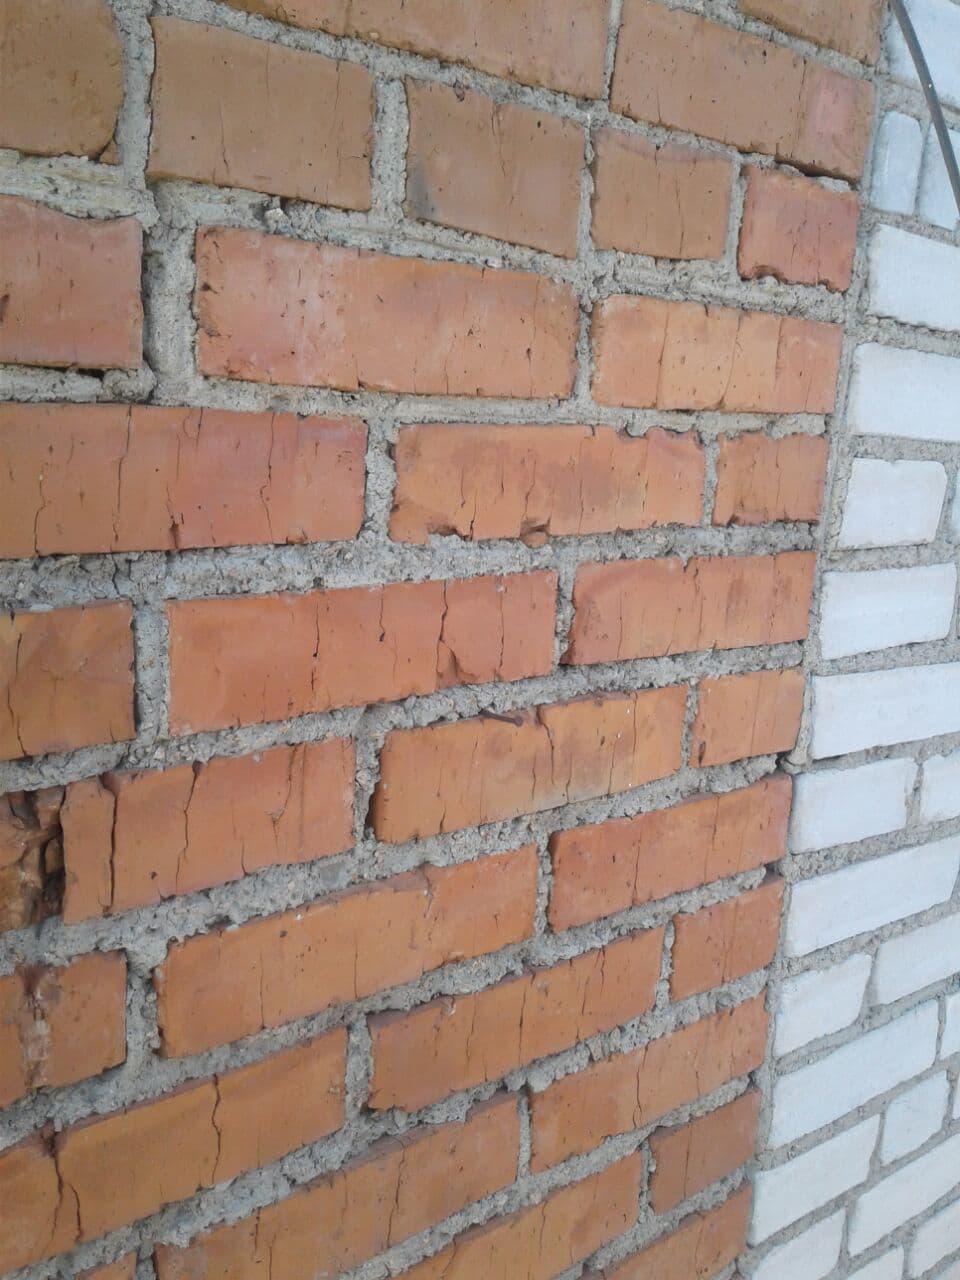 Can someone identify mortar mix by its color? | DIY Home Improvement Forum